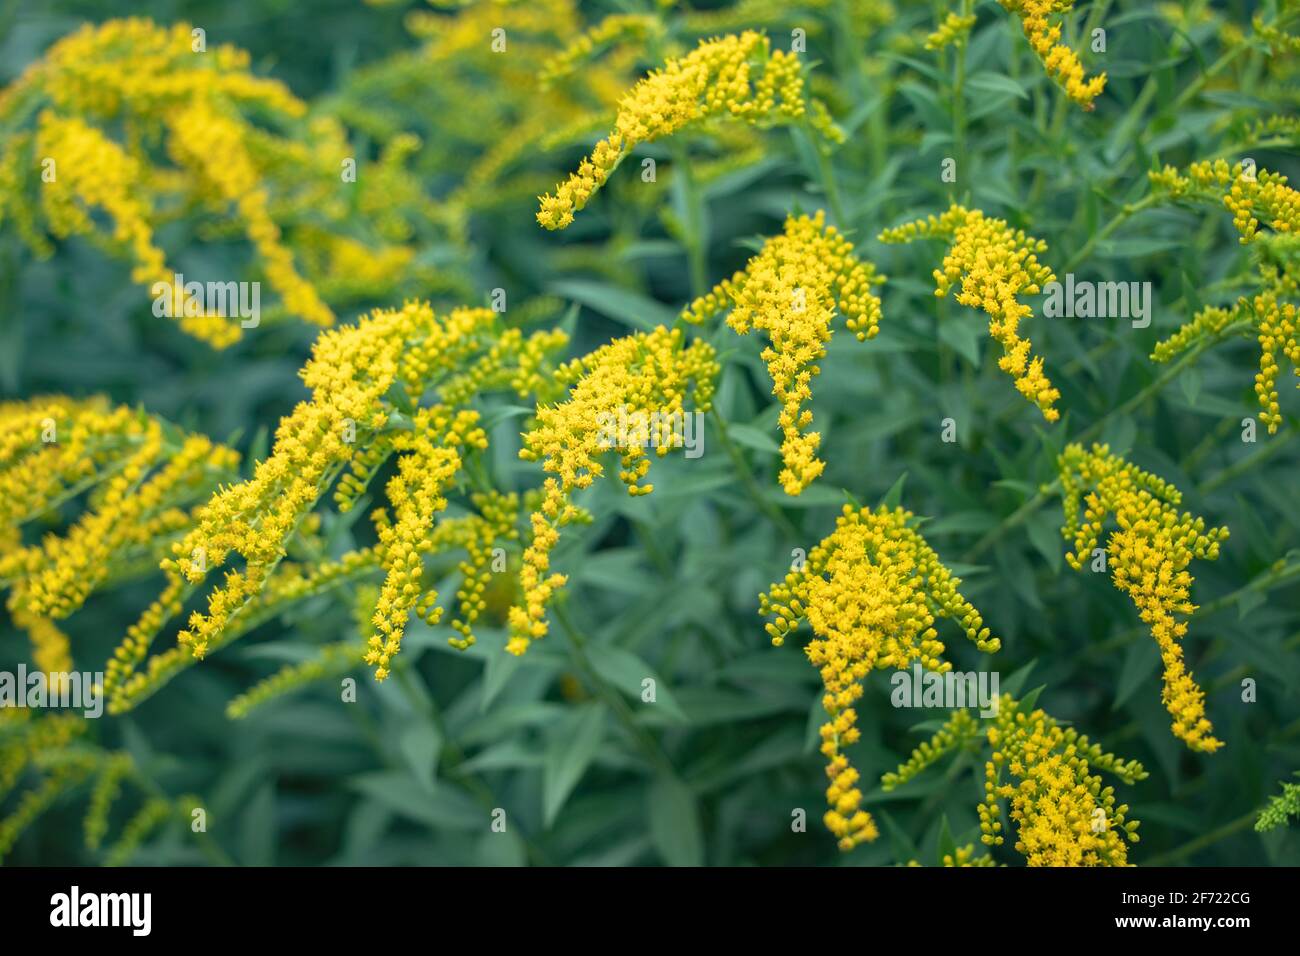 Goldenrod flower or Solidago Canadensis, honey plant, sunset, close-up, selective focus. Stock Photo